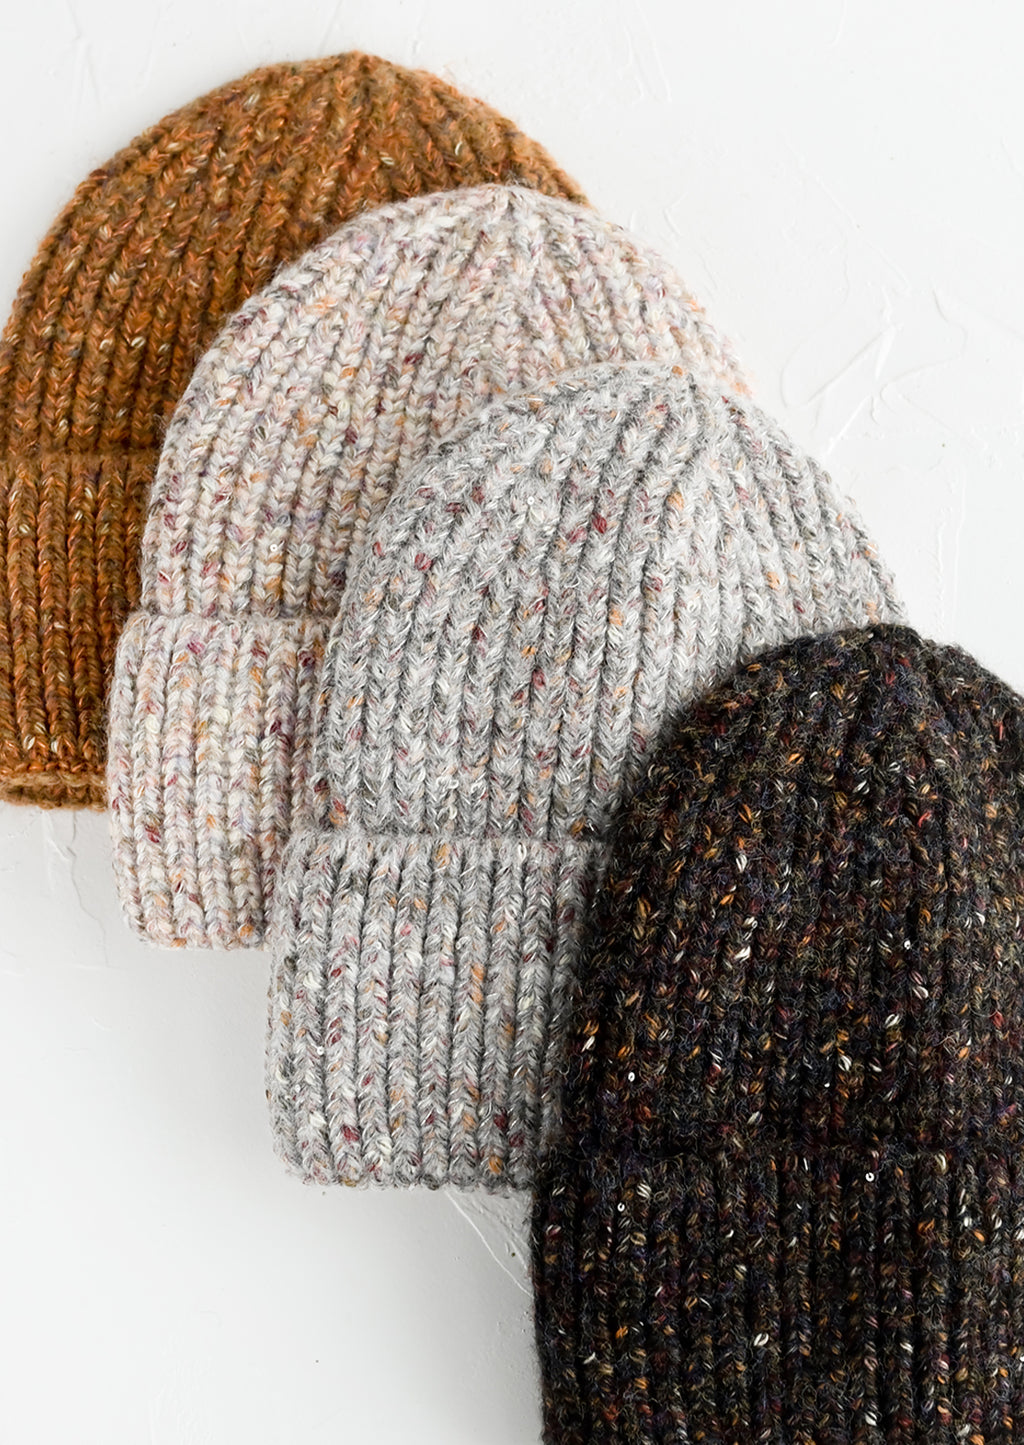 2: Four speckled yarn beanies in assorted colors.